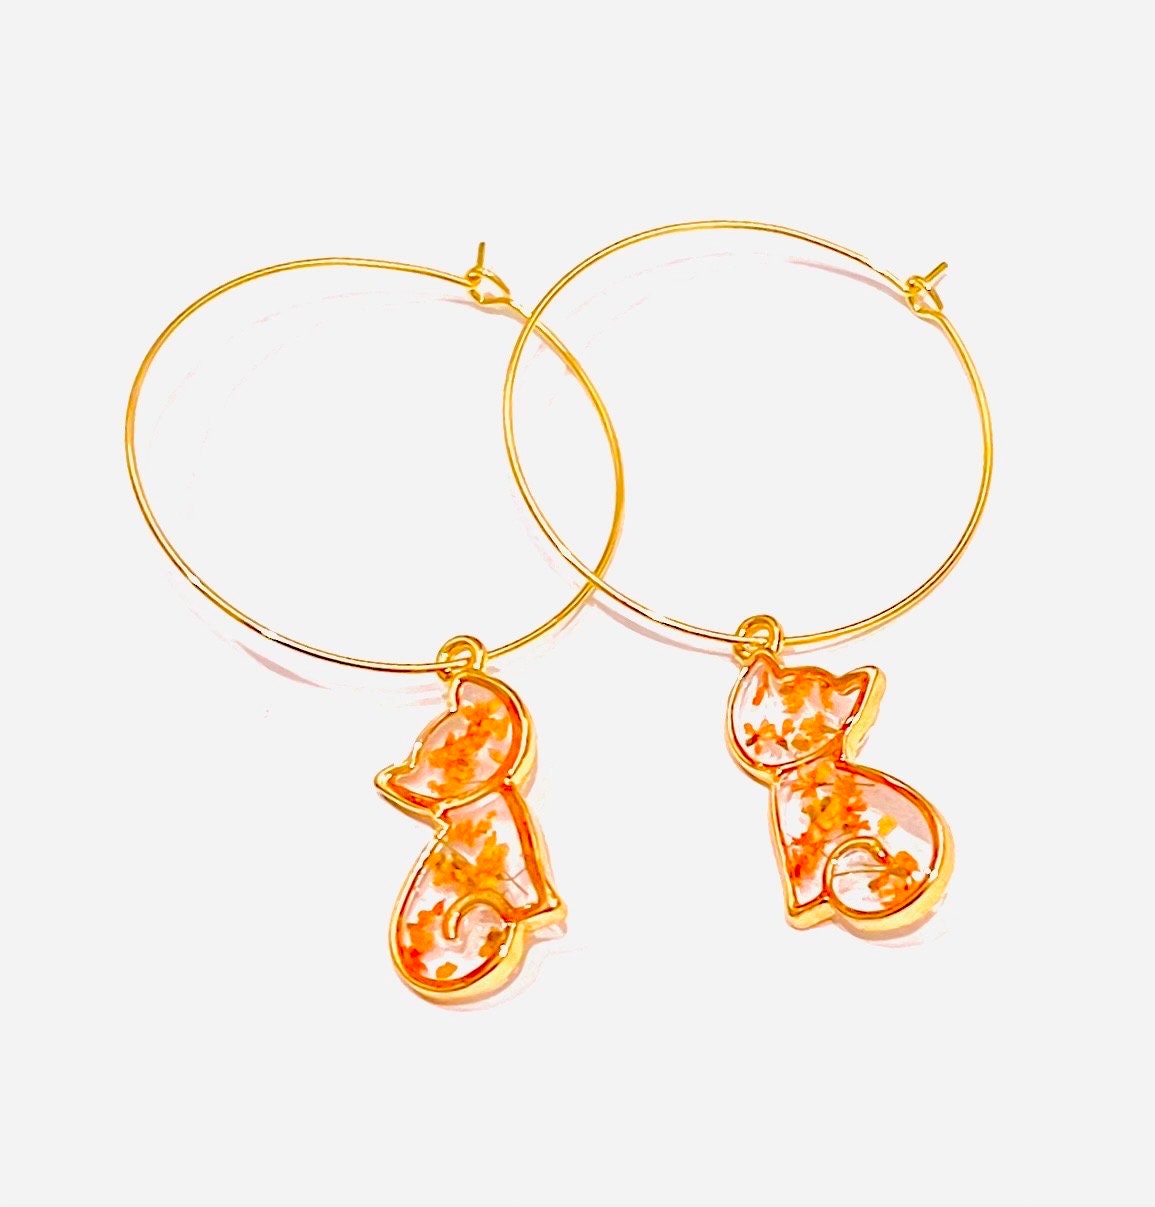 Orange Cat Earrings. Orange Queen Anne’s lace flowers. 14K white gold plated earrings. Special Gift for Cat Lovers.